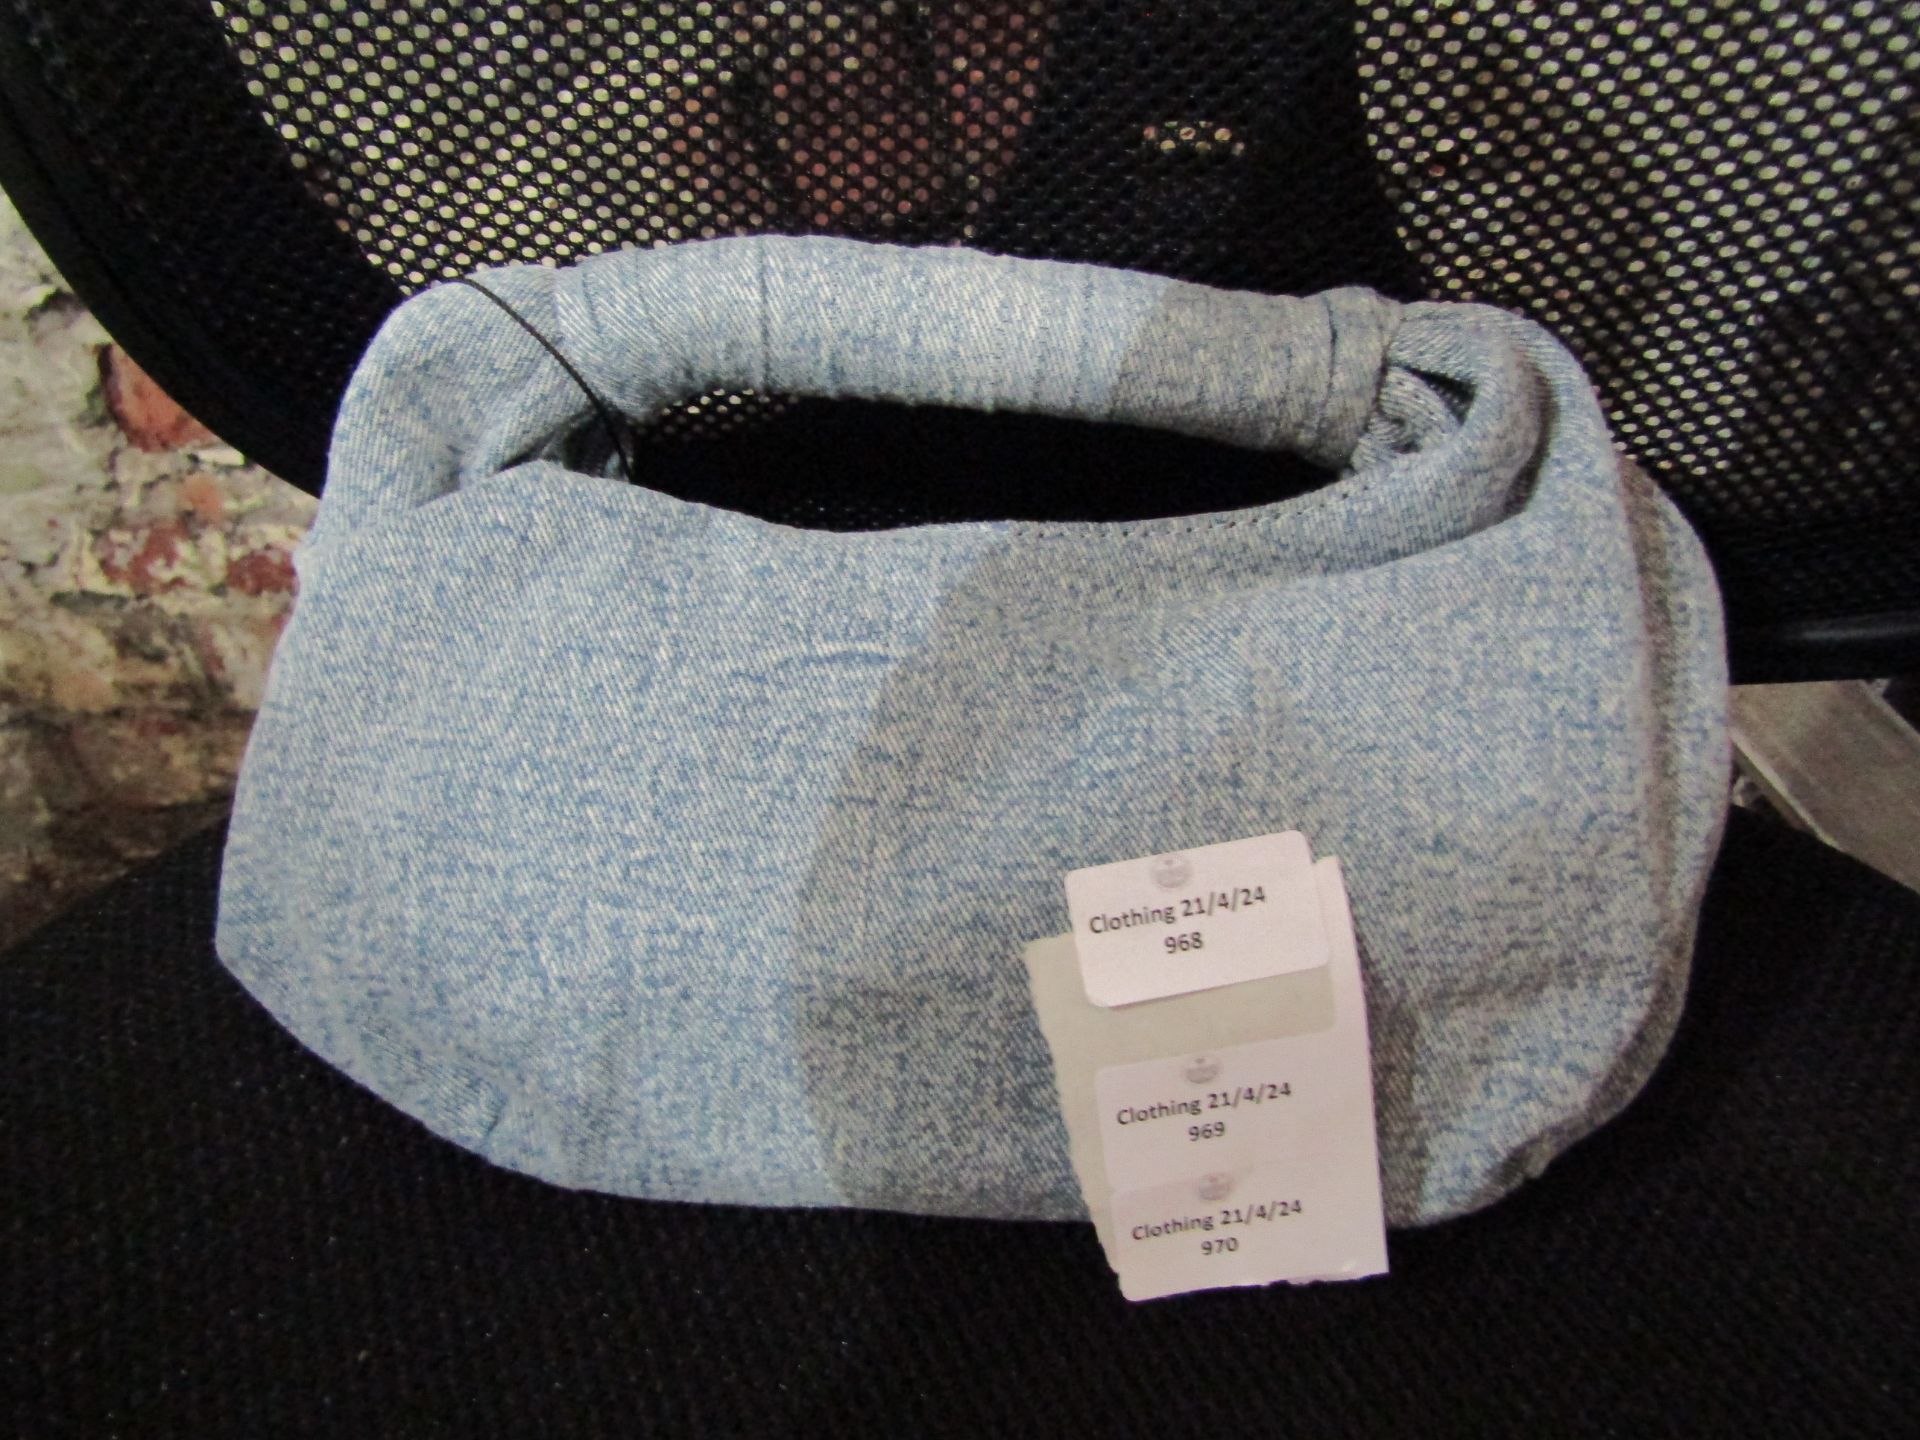 PrettyLittleThing Blue Denim Washed Woven Mini Bag - Good Condition With Tag.